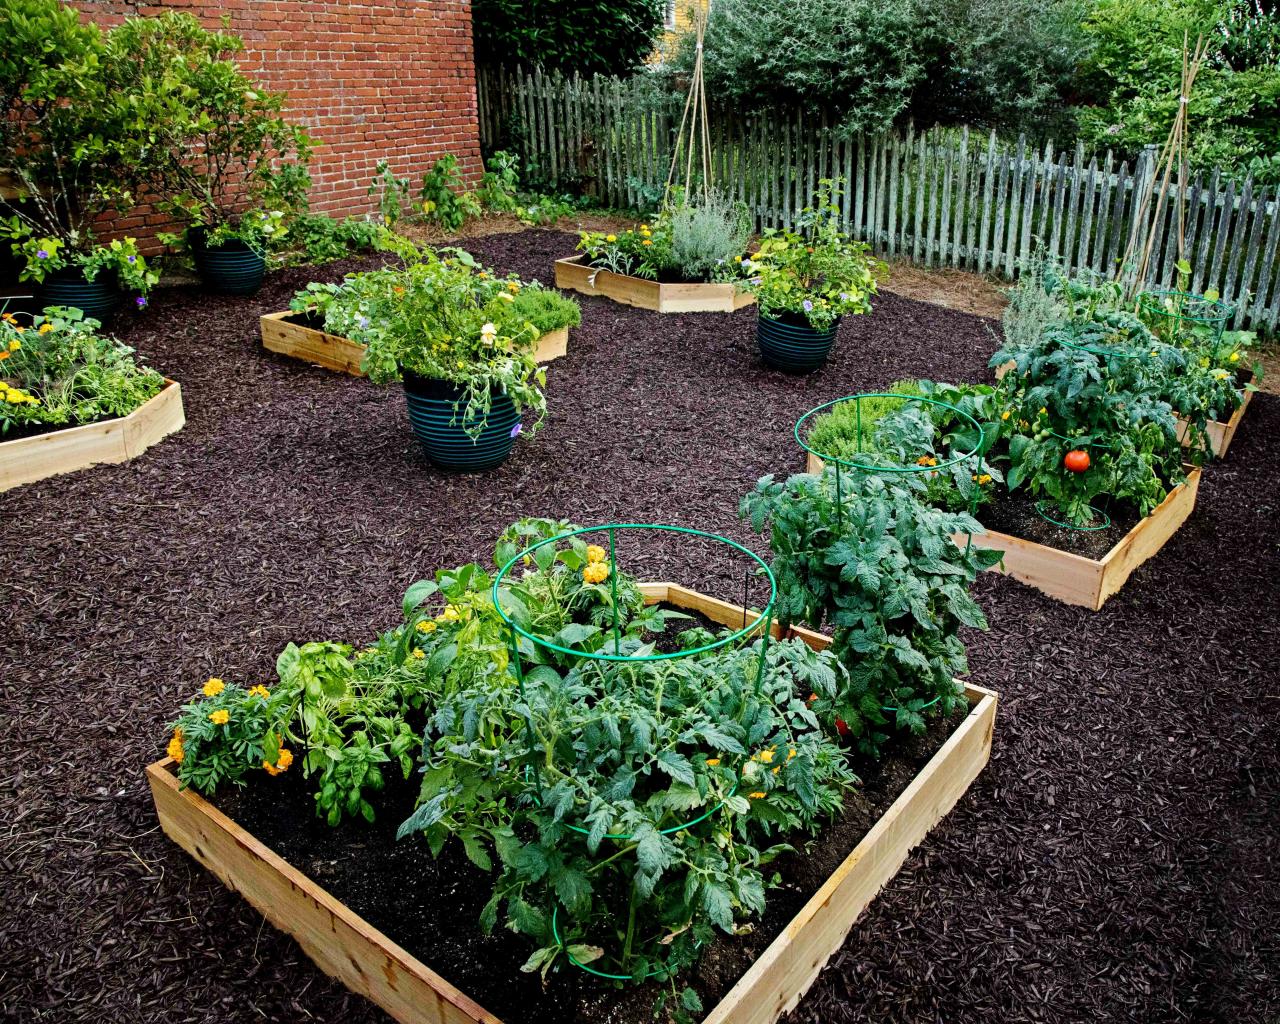 How To Build a Raised Garden Planter Bed - Gardening Project DIY